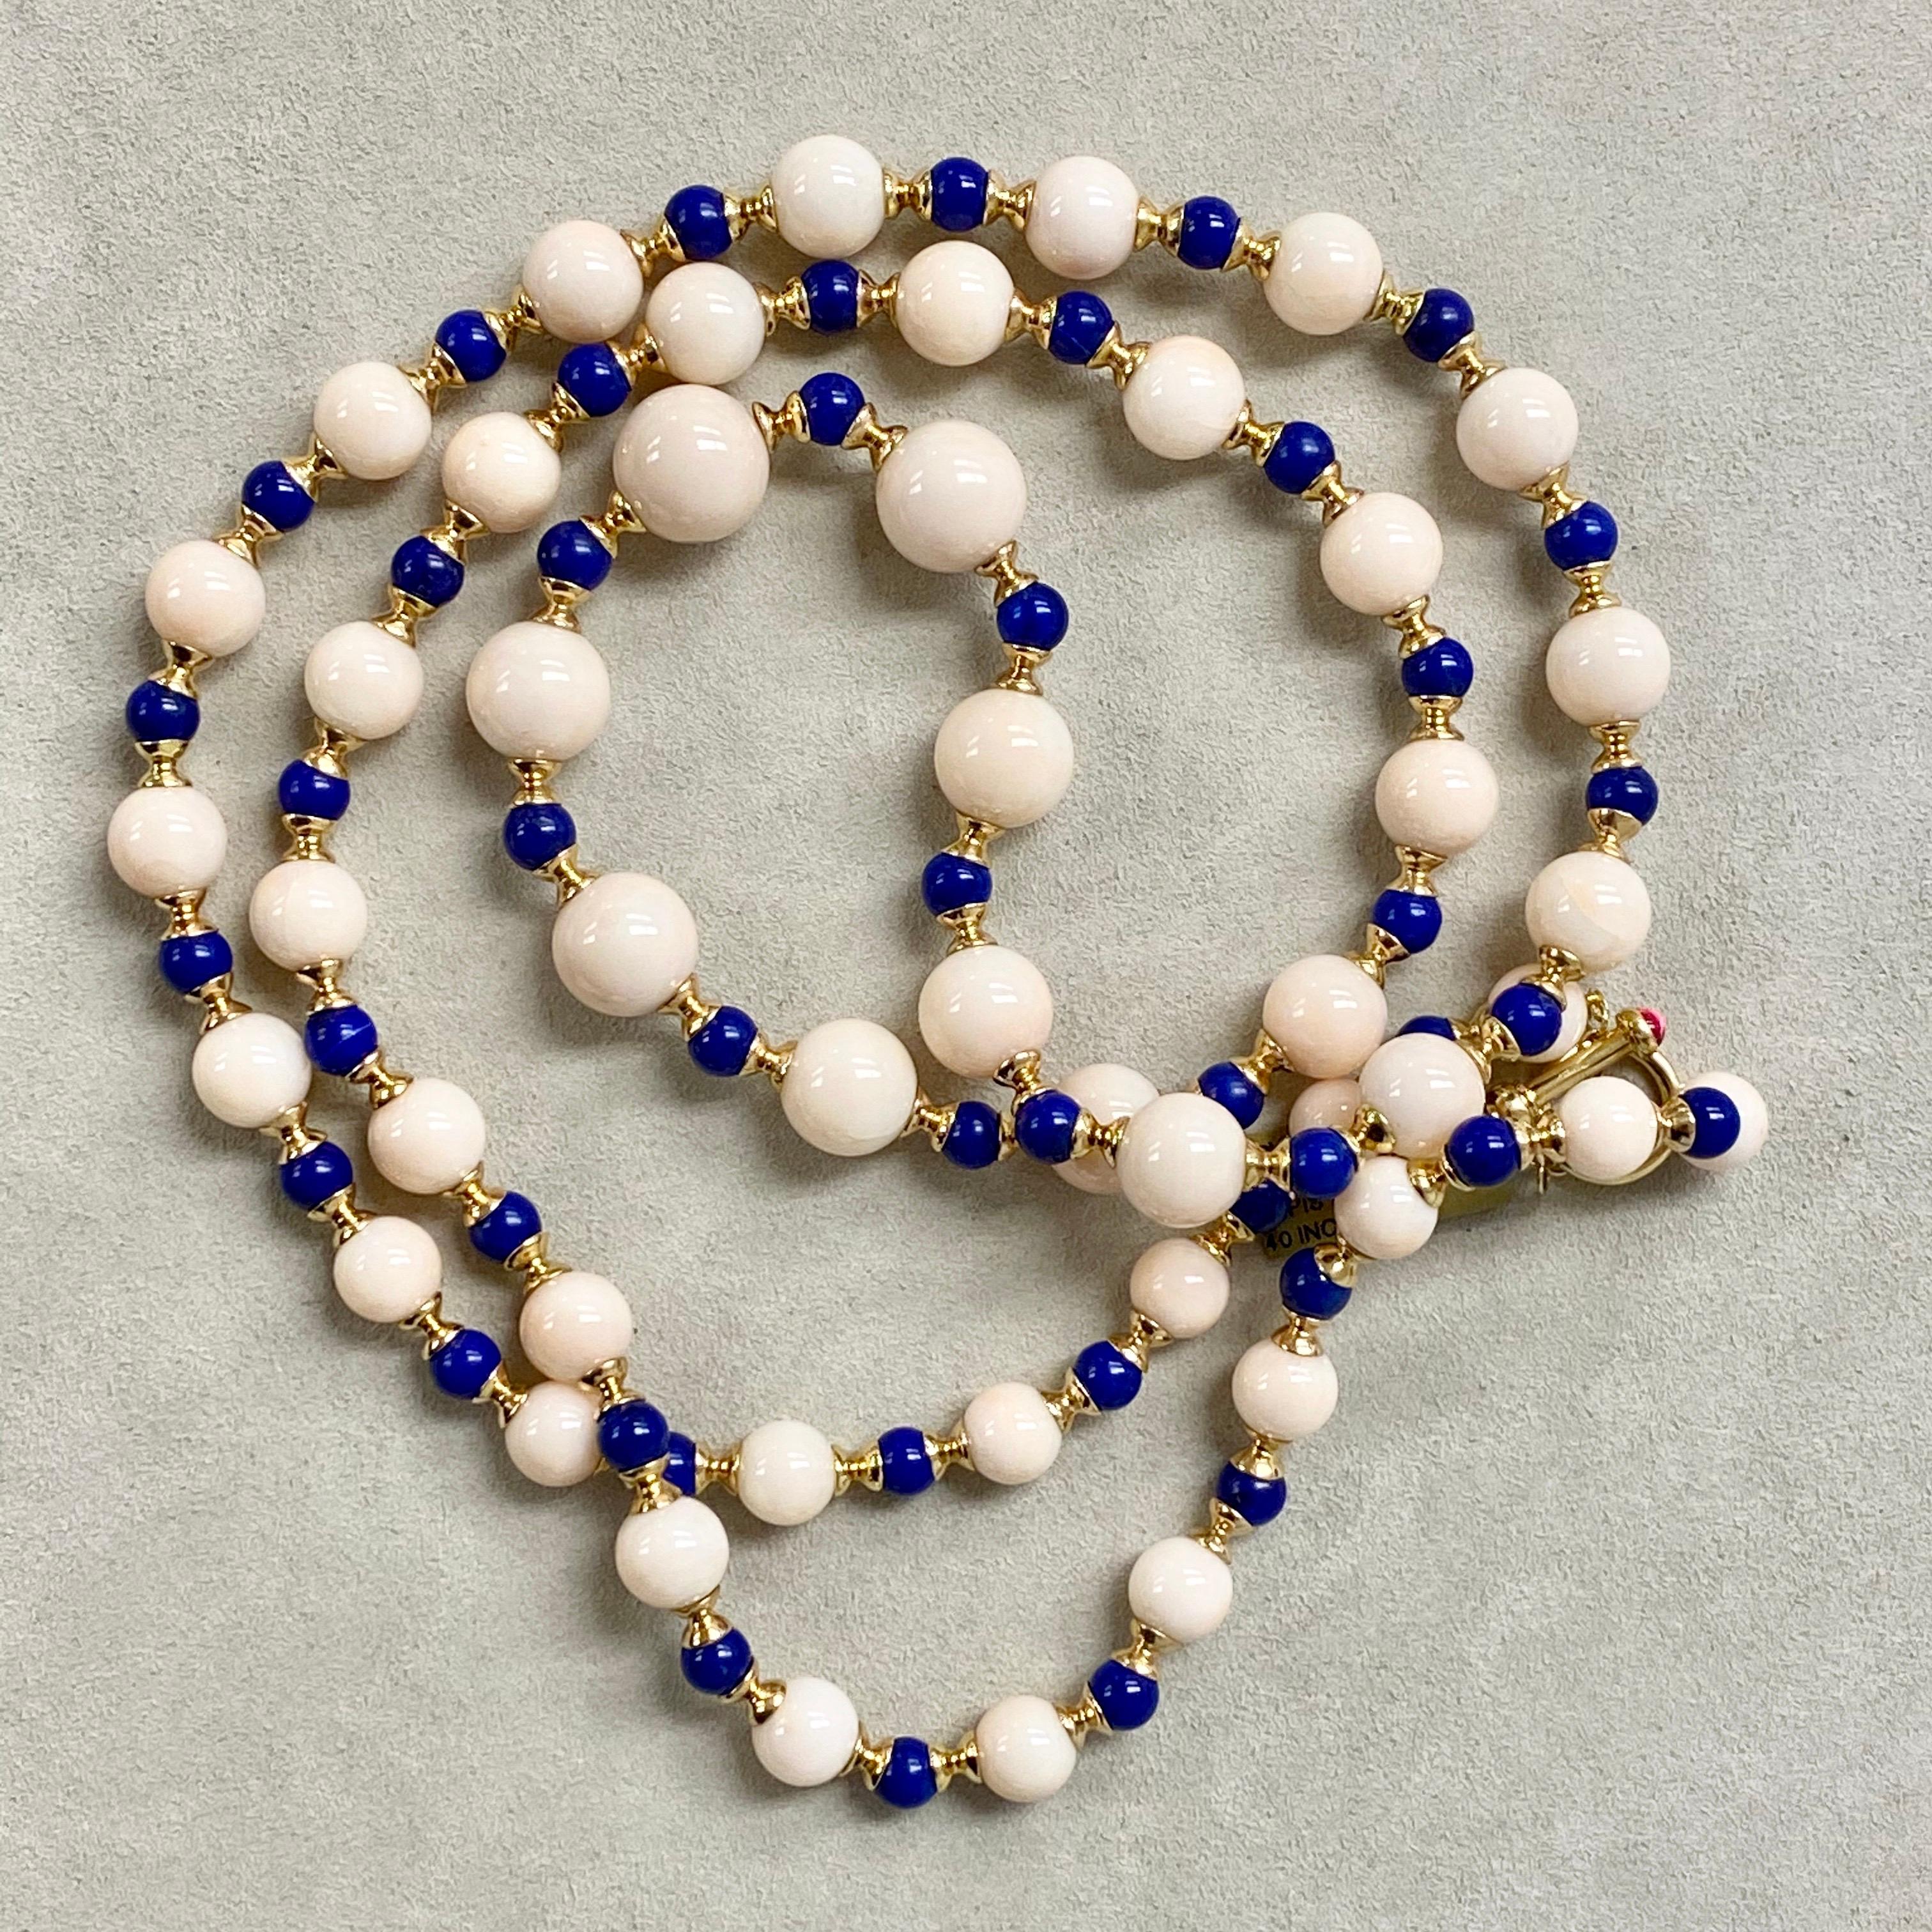 Women's Syna Angel Skin Coral Lapis Lazuli Yellow Gold Bead Necklace